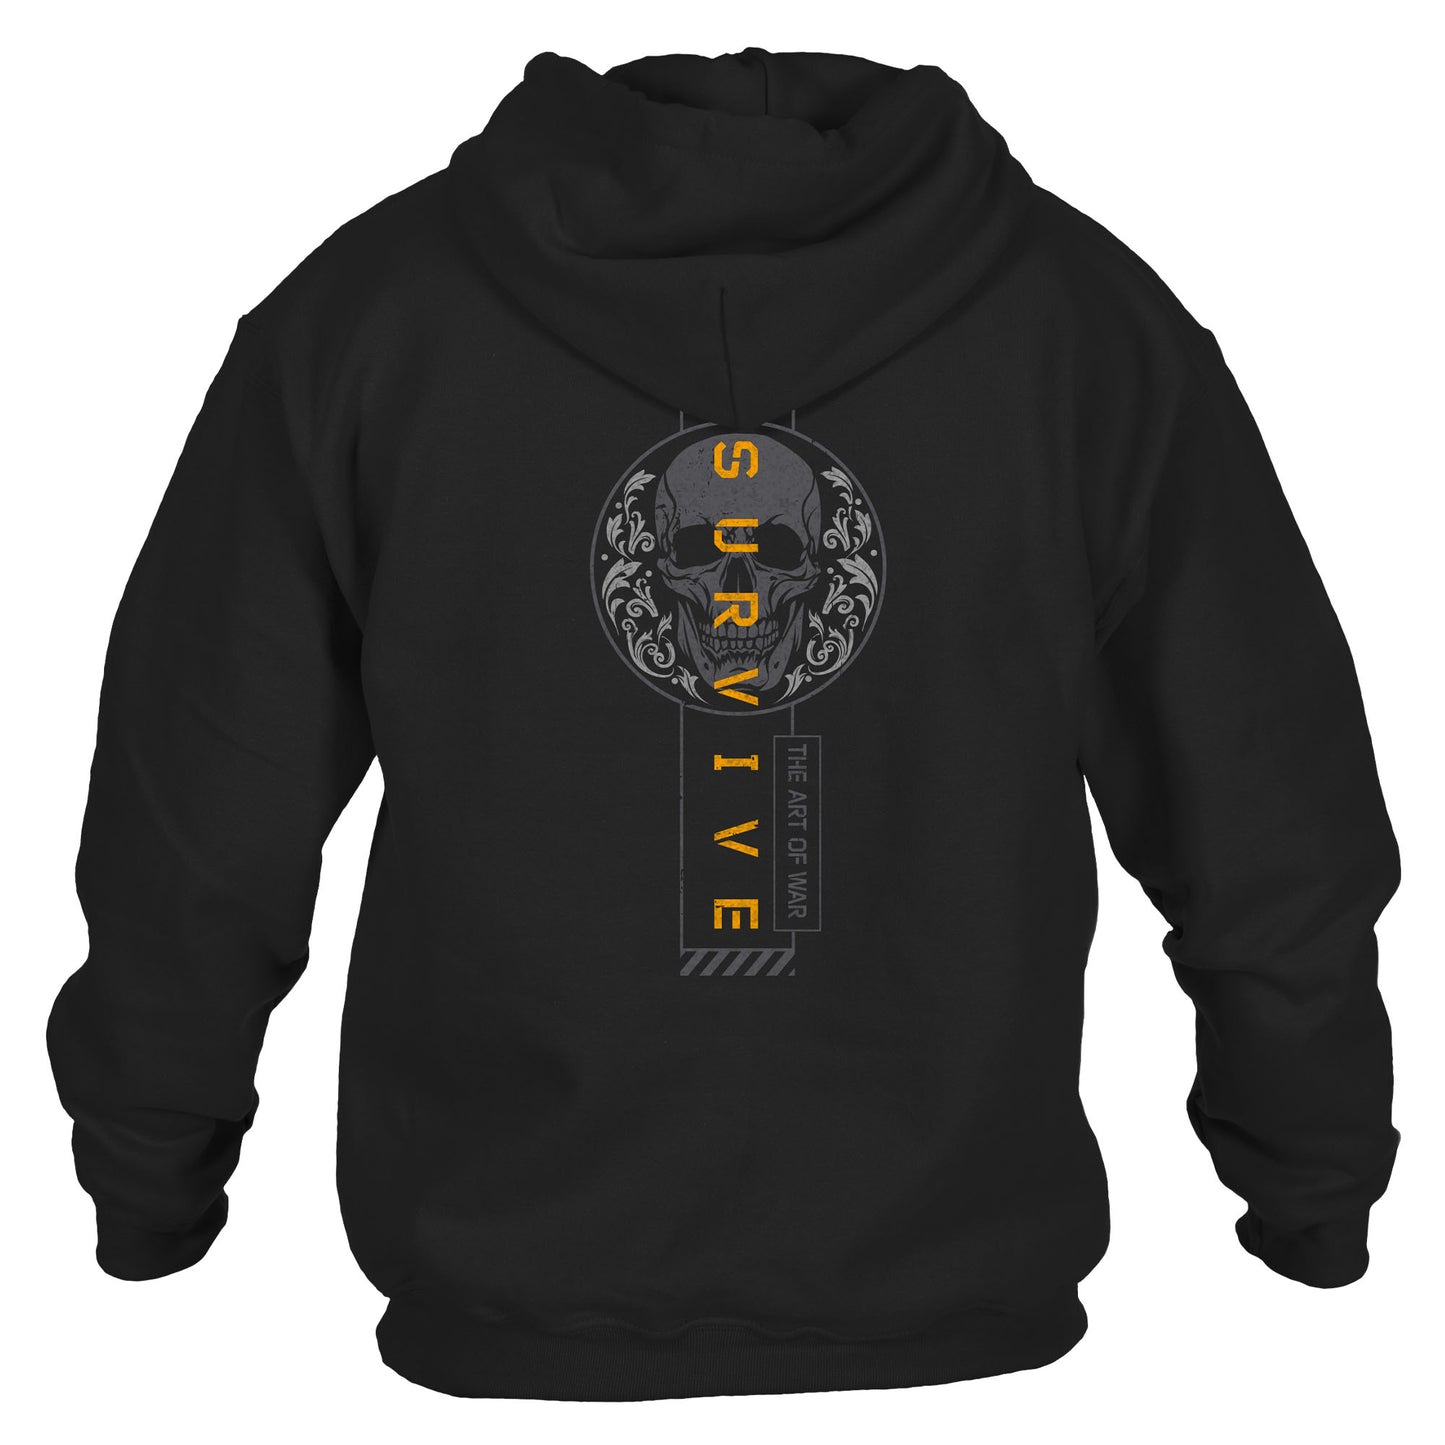 I Survive Workout Hoodie 